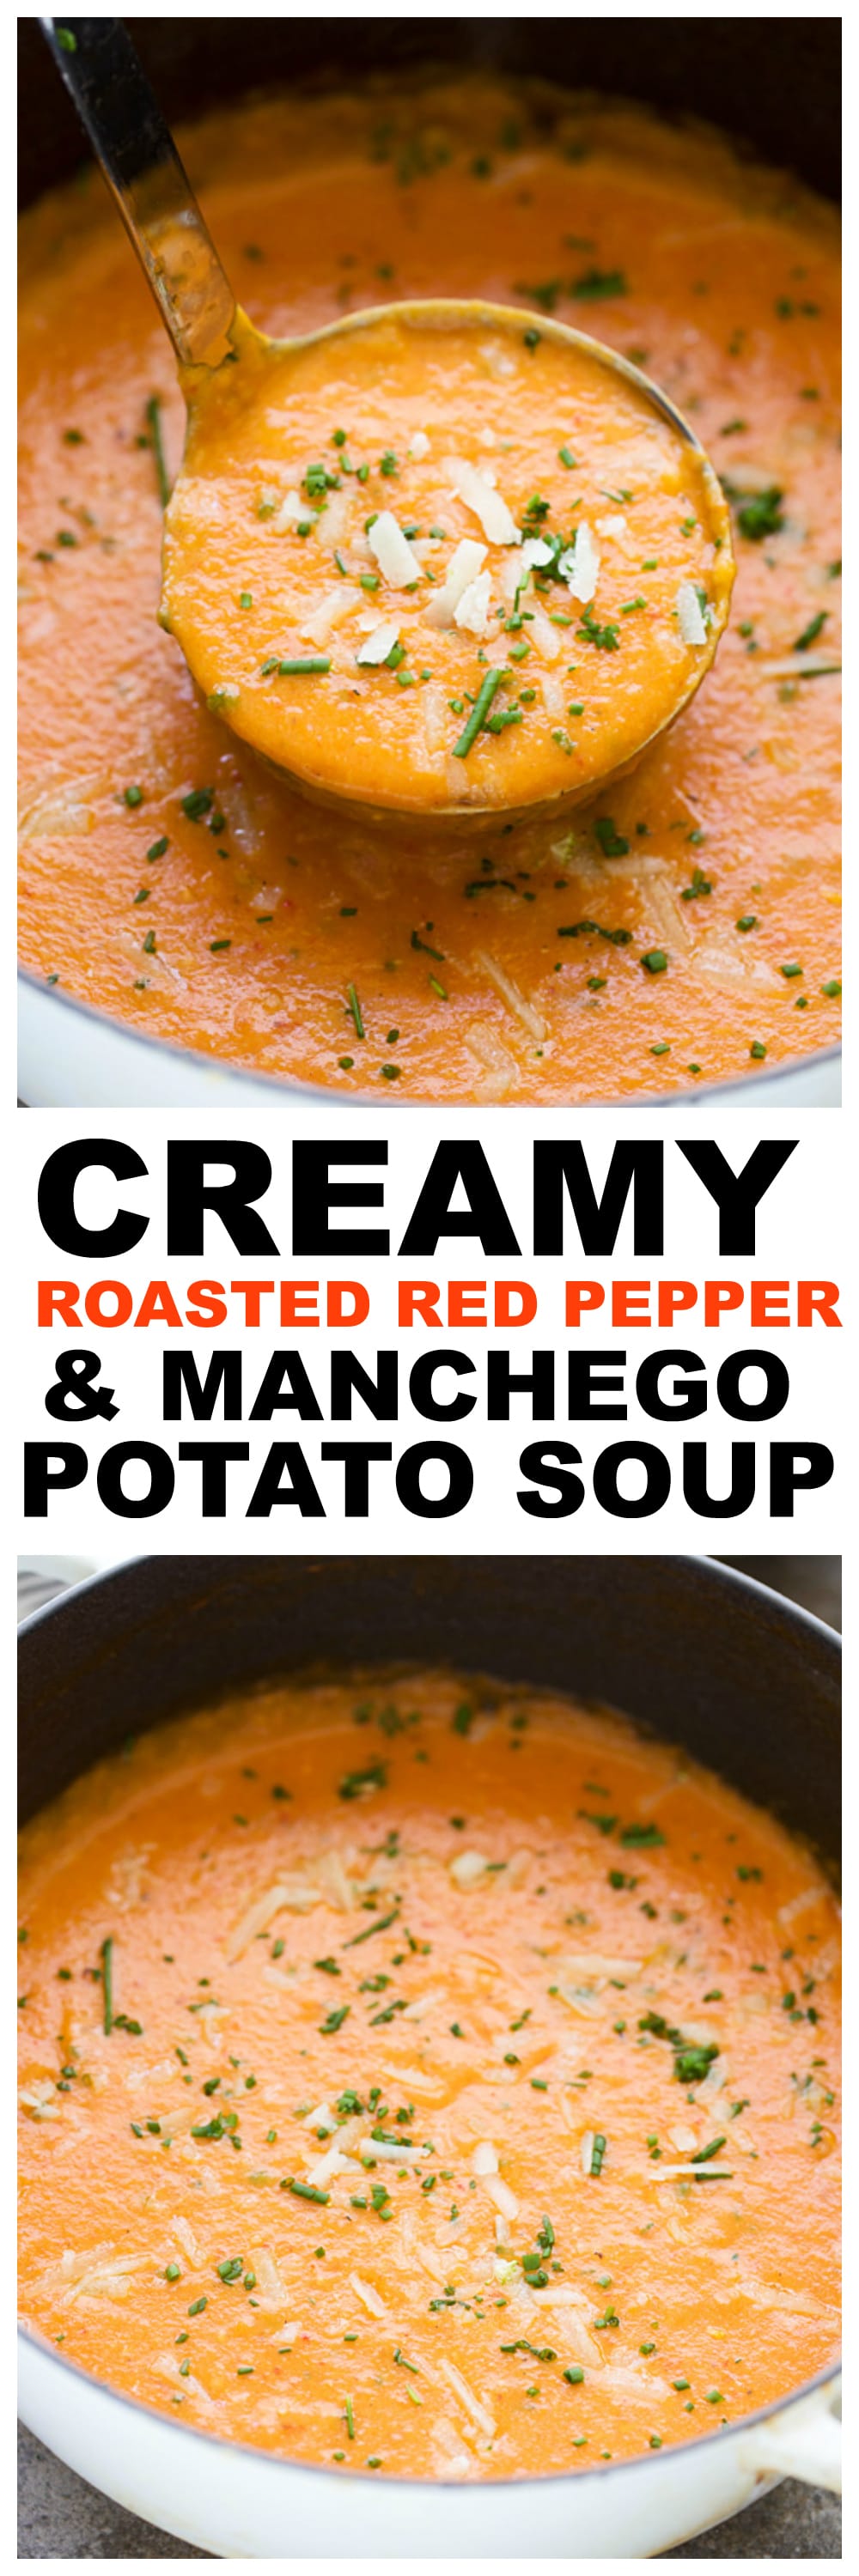 Creamy Roasted Red Pepper & Manchego Potato Soup - 30 MINUTES! 